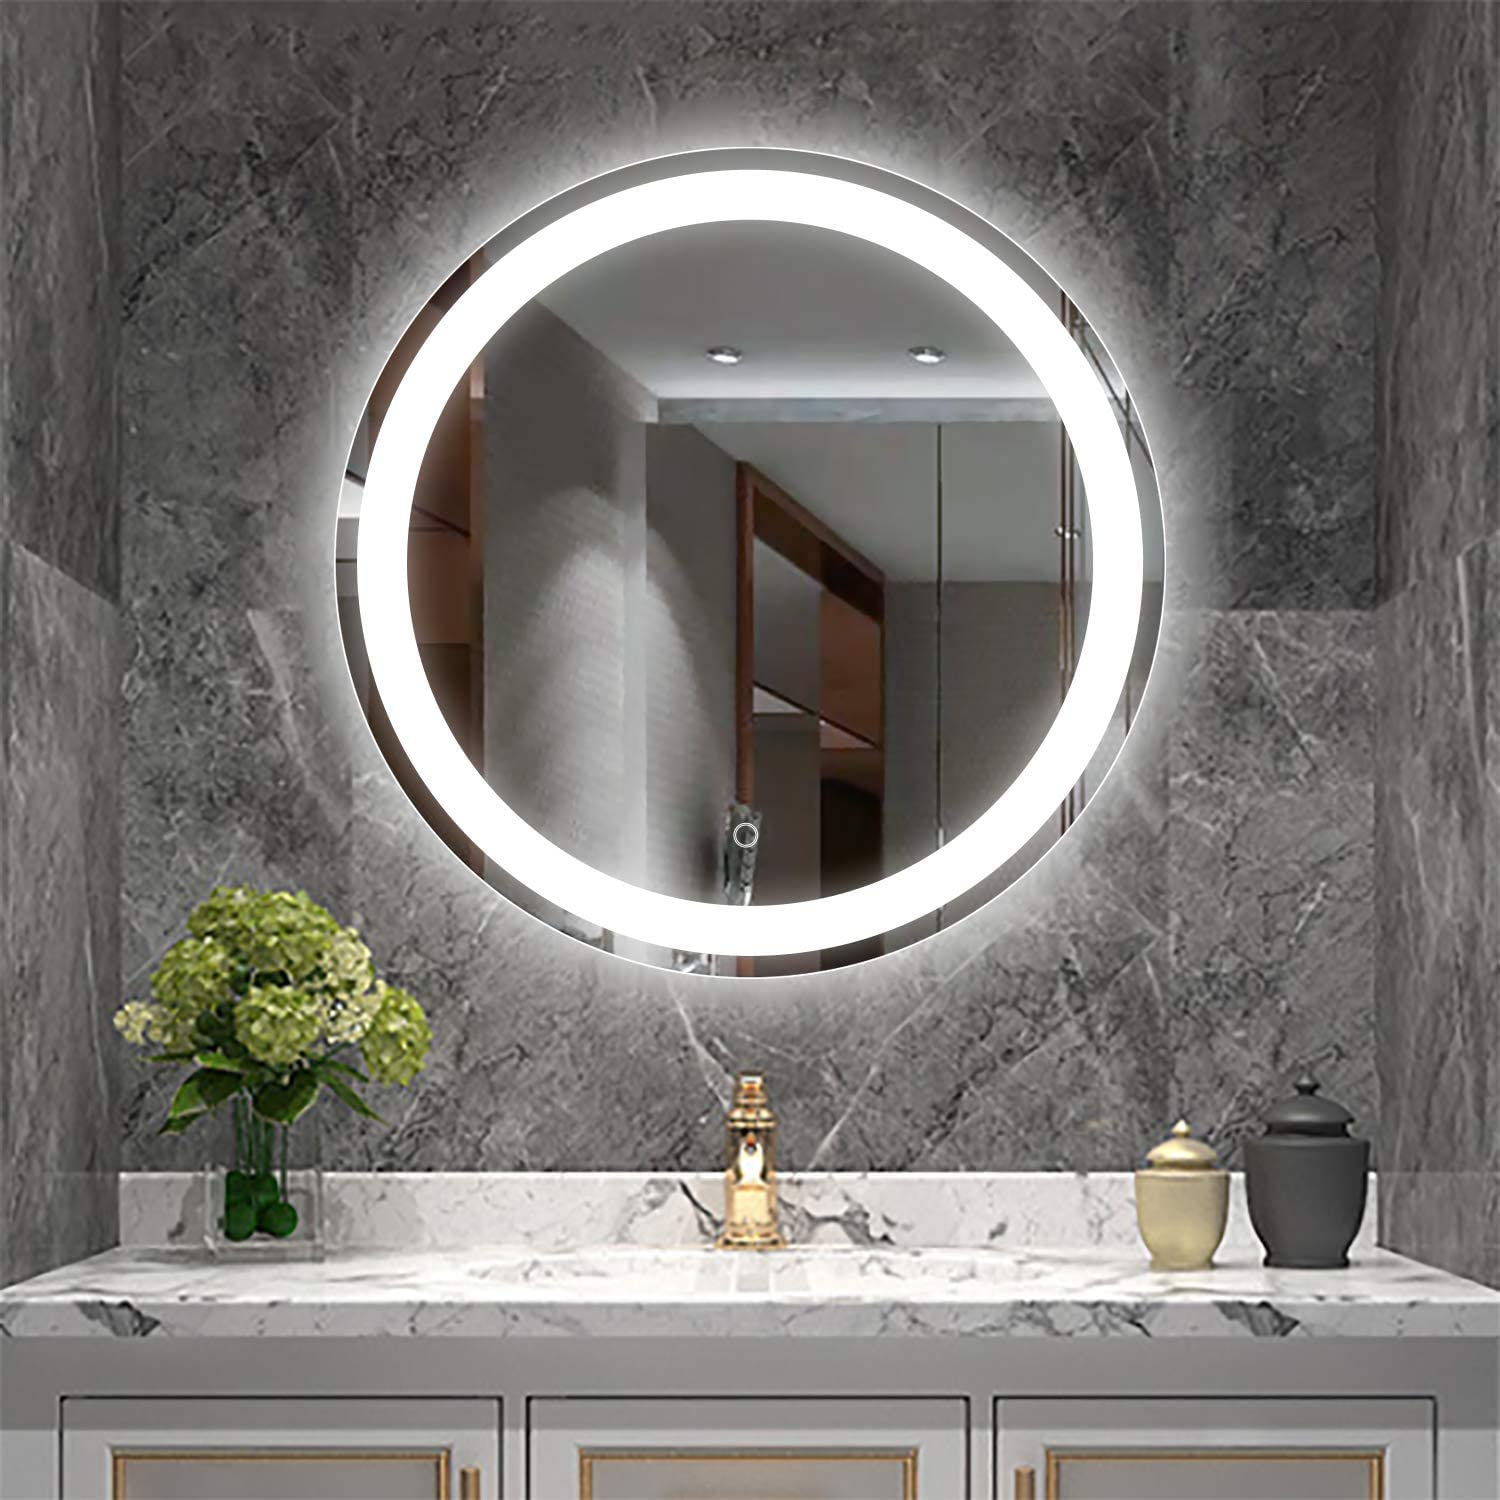 LED COLOR MIRROR